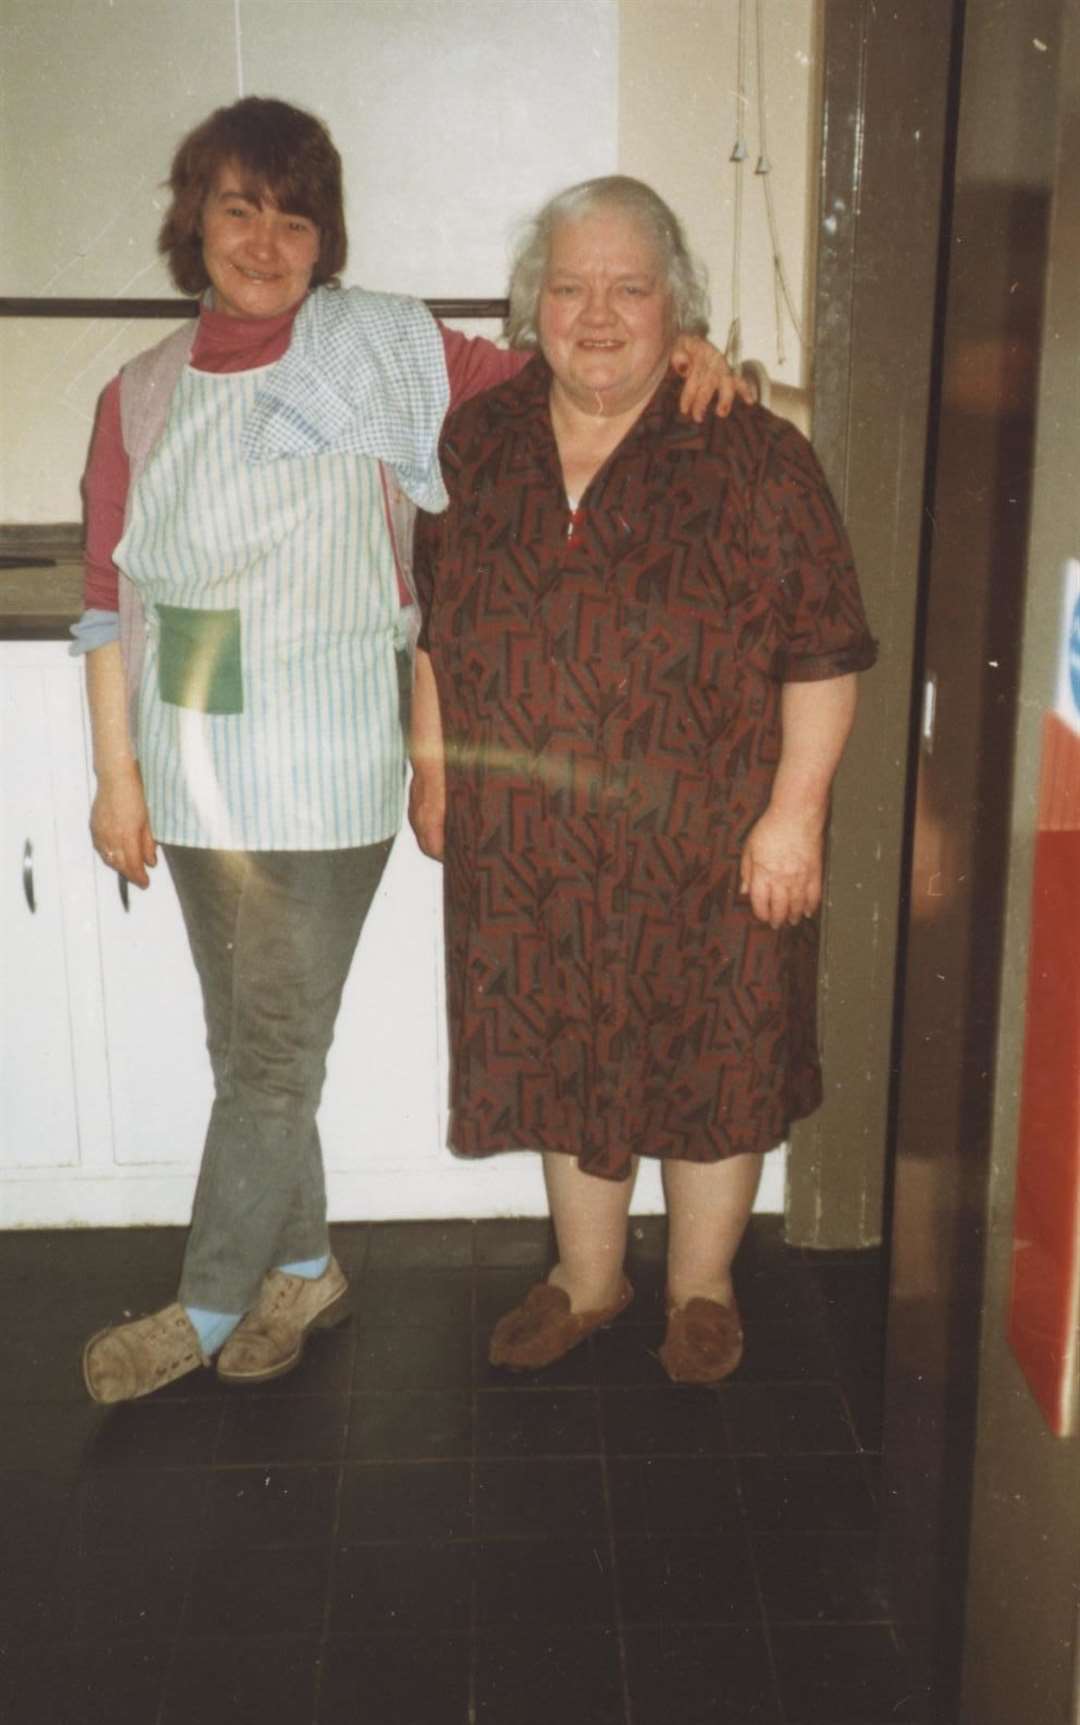 Bessie and Sheena Mackay when they were working together.